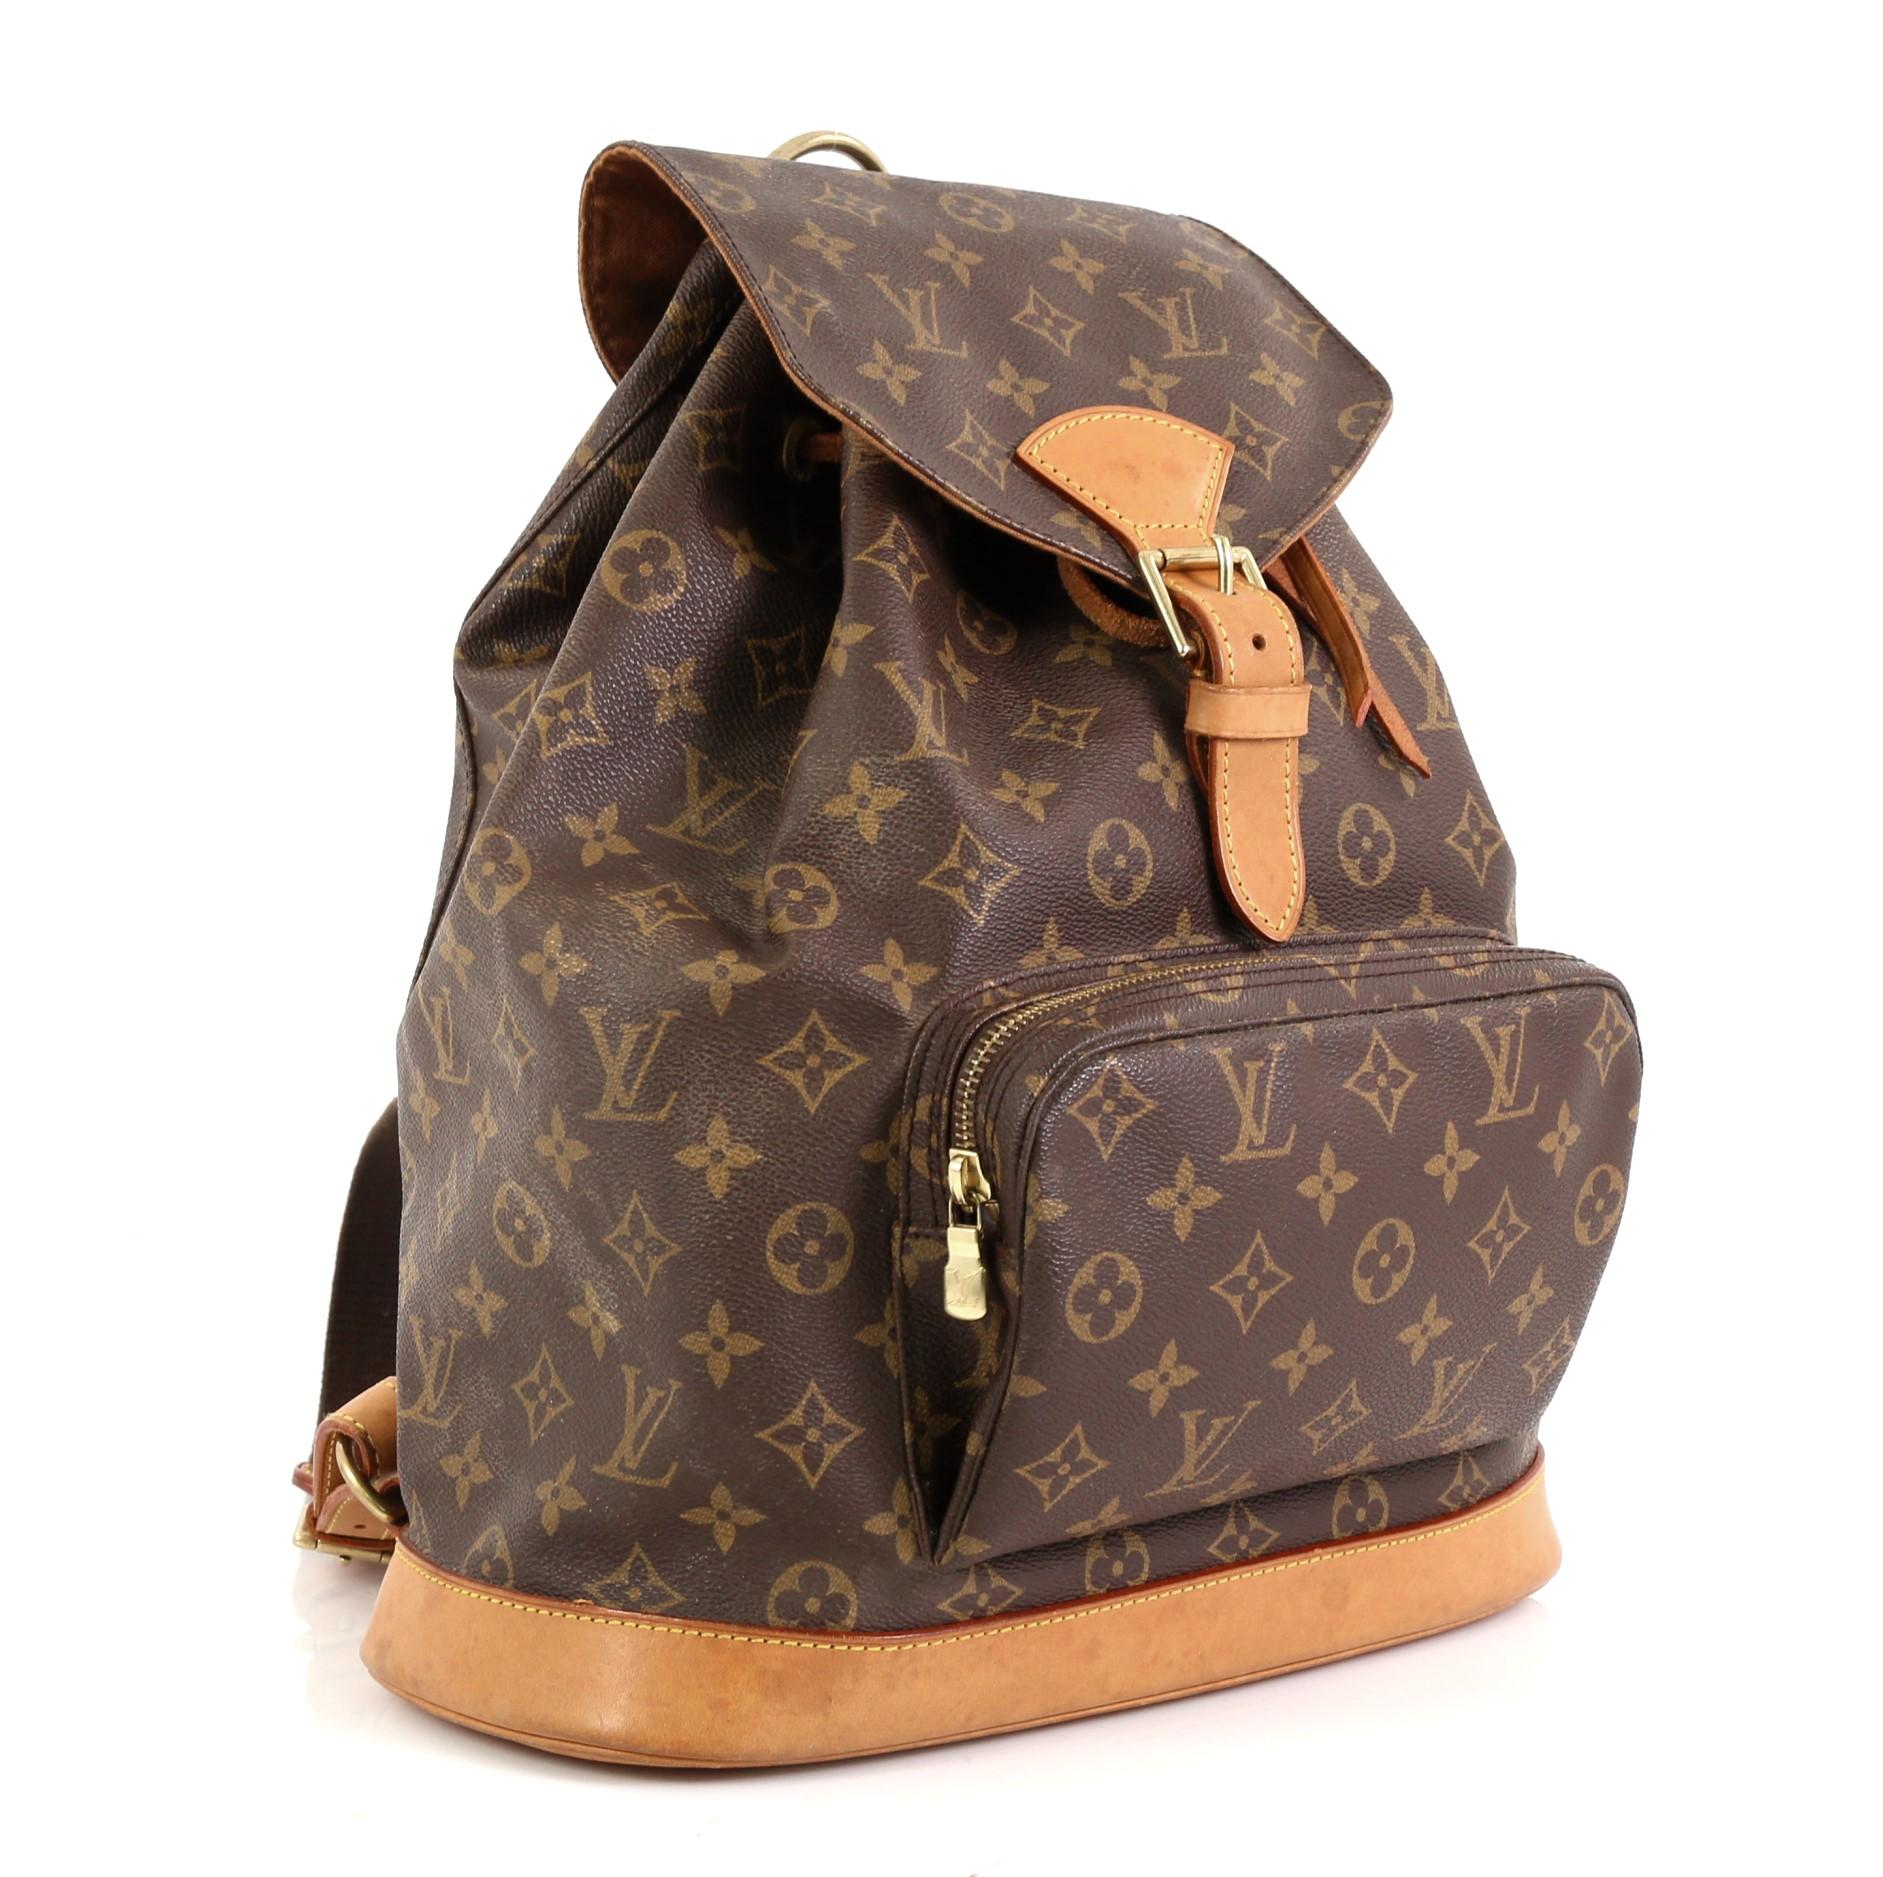 This Louis Vuitton Montsouris Backpack Monogram Canvas GM, crafted from brown monogram coated canvas, features adjustable canvas straps, cowhide leather base, exterior front zip pocket and gold-tone hardware. Its flap top frontal buckle and